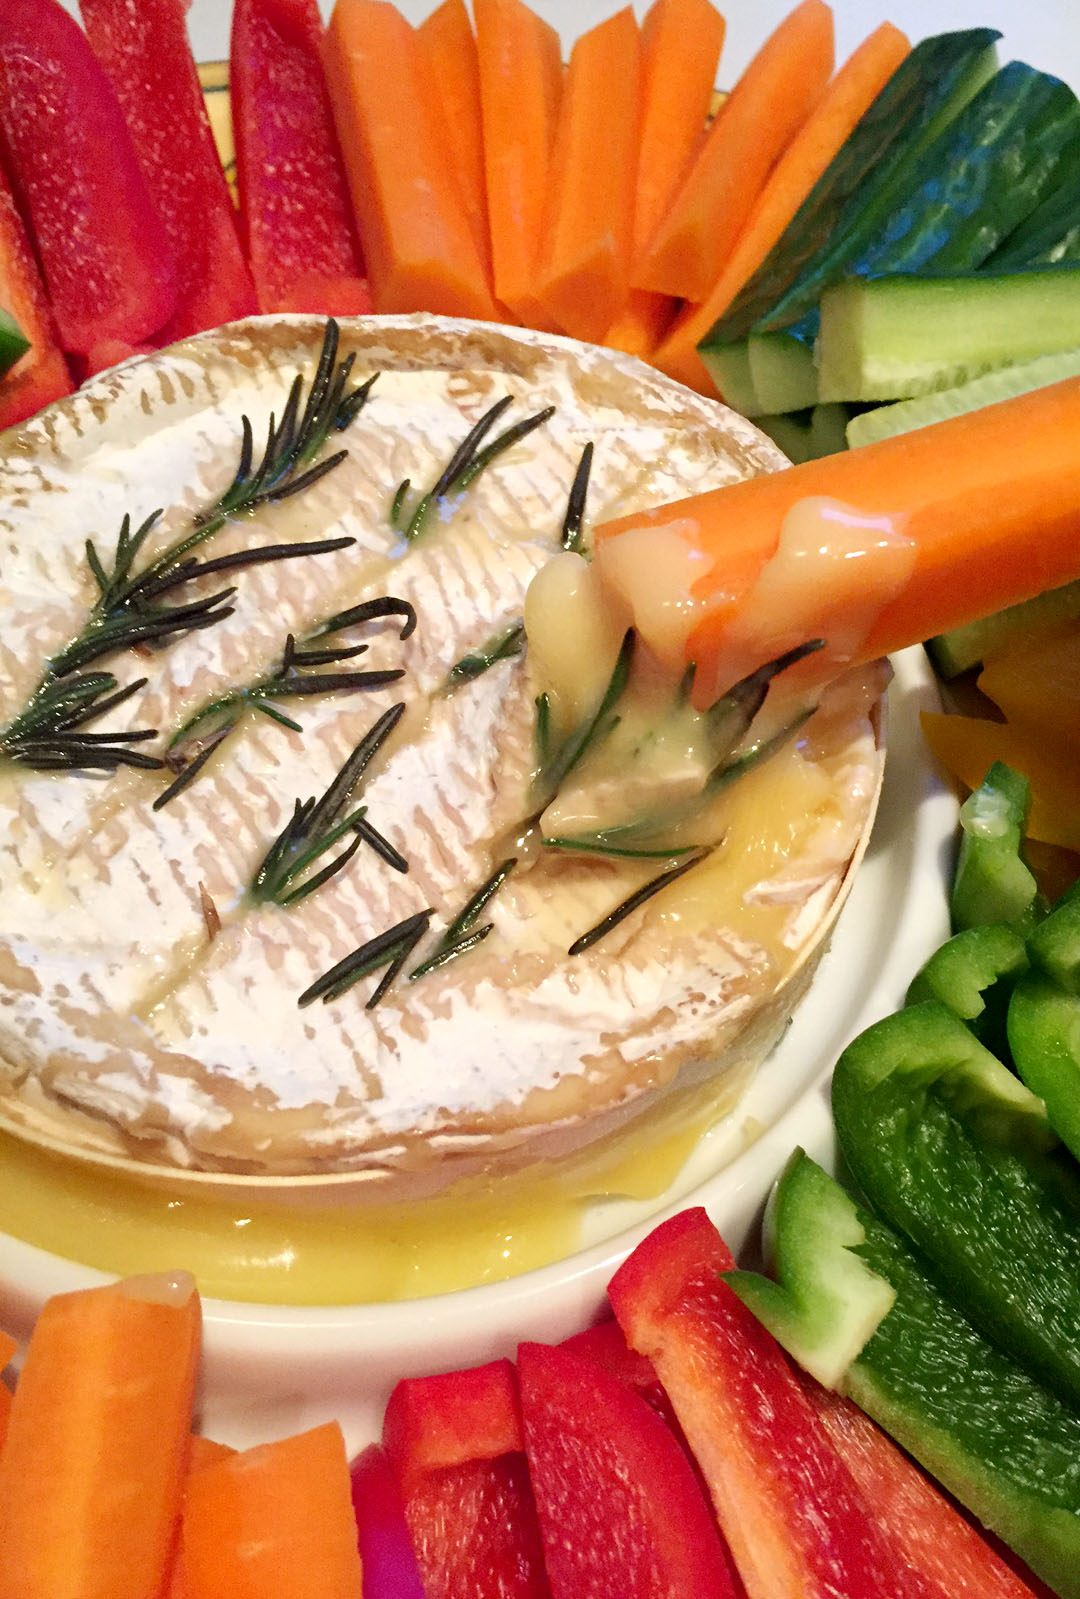 Baked Camembert with Garlic & Rosemary by Emma Eats & Explores - Grainfree, Glutenfree, Refined Sugarfree, Paleo, SCD, Vegetarian, Low Carb